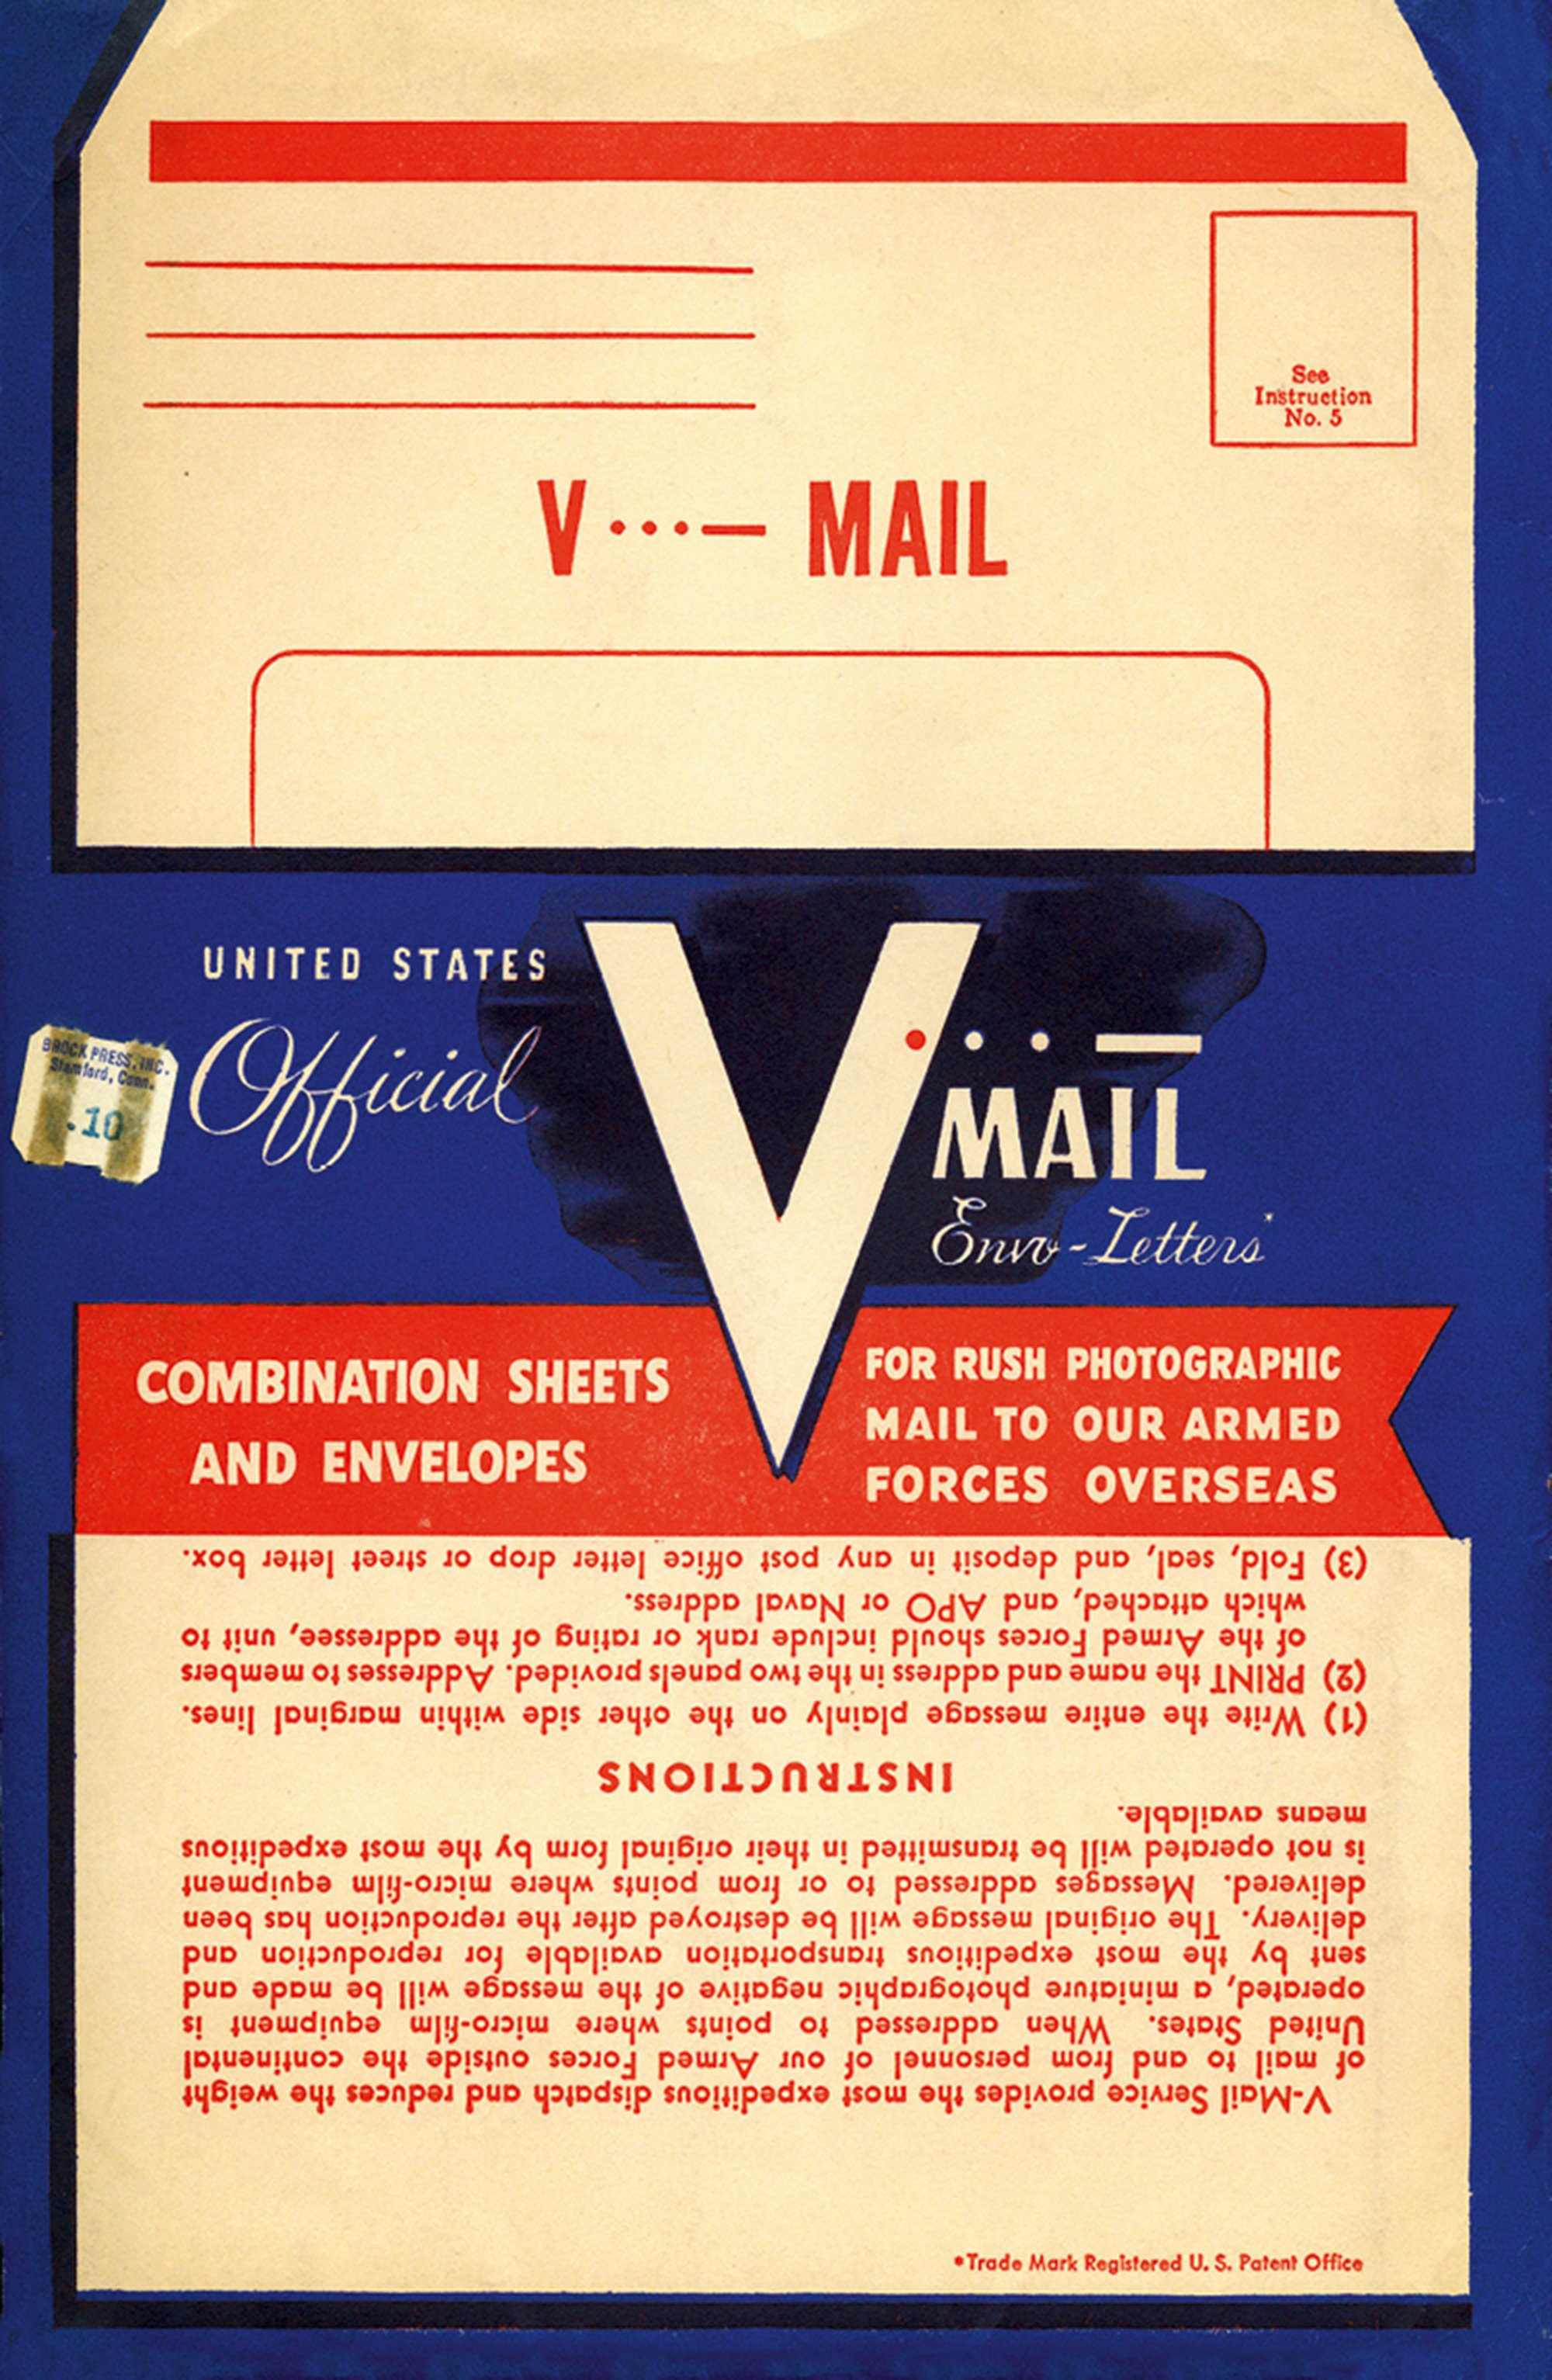 A photograph of patriotic packaging for V-Mail, a special stationery and envelope system created during World War 2 for correspondence between the US and overseas military personnel.